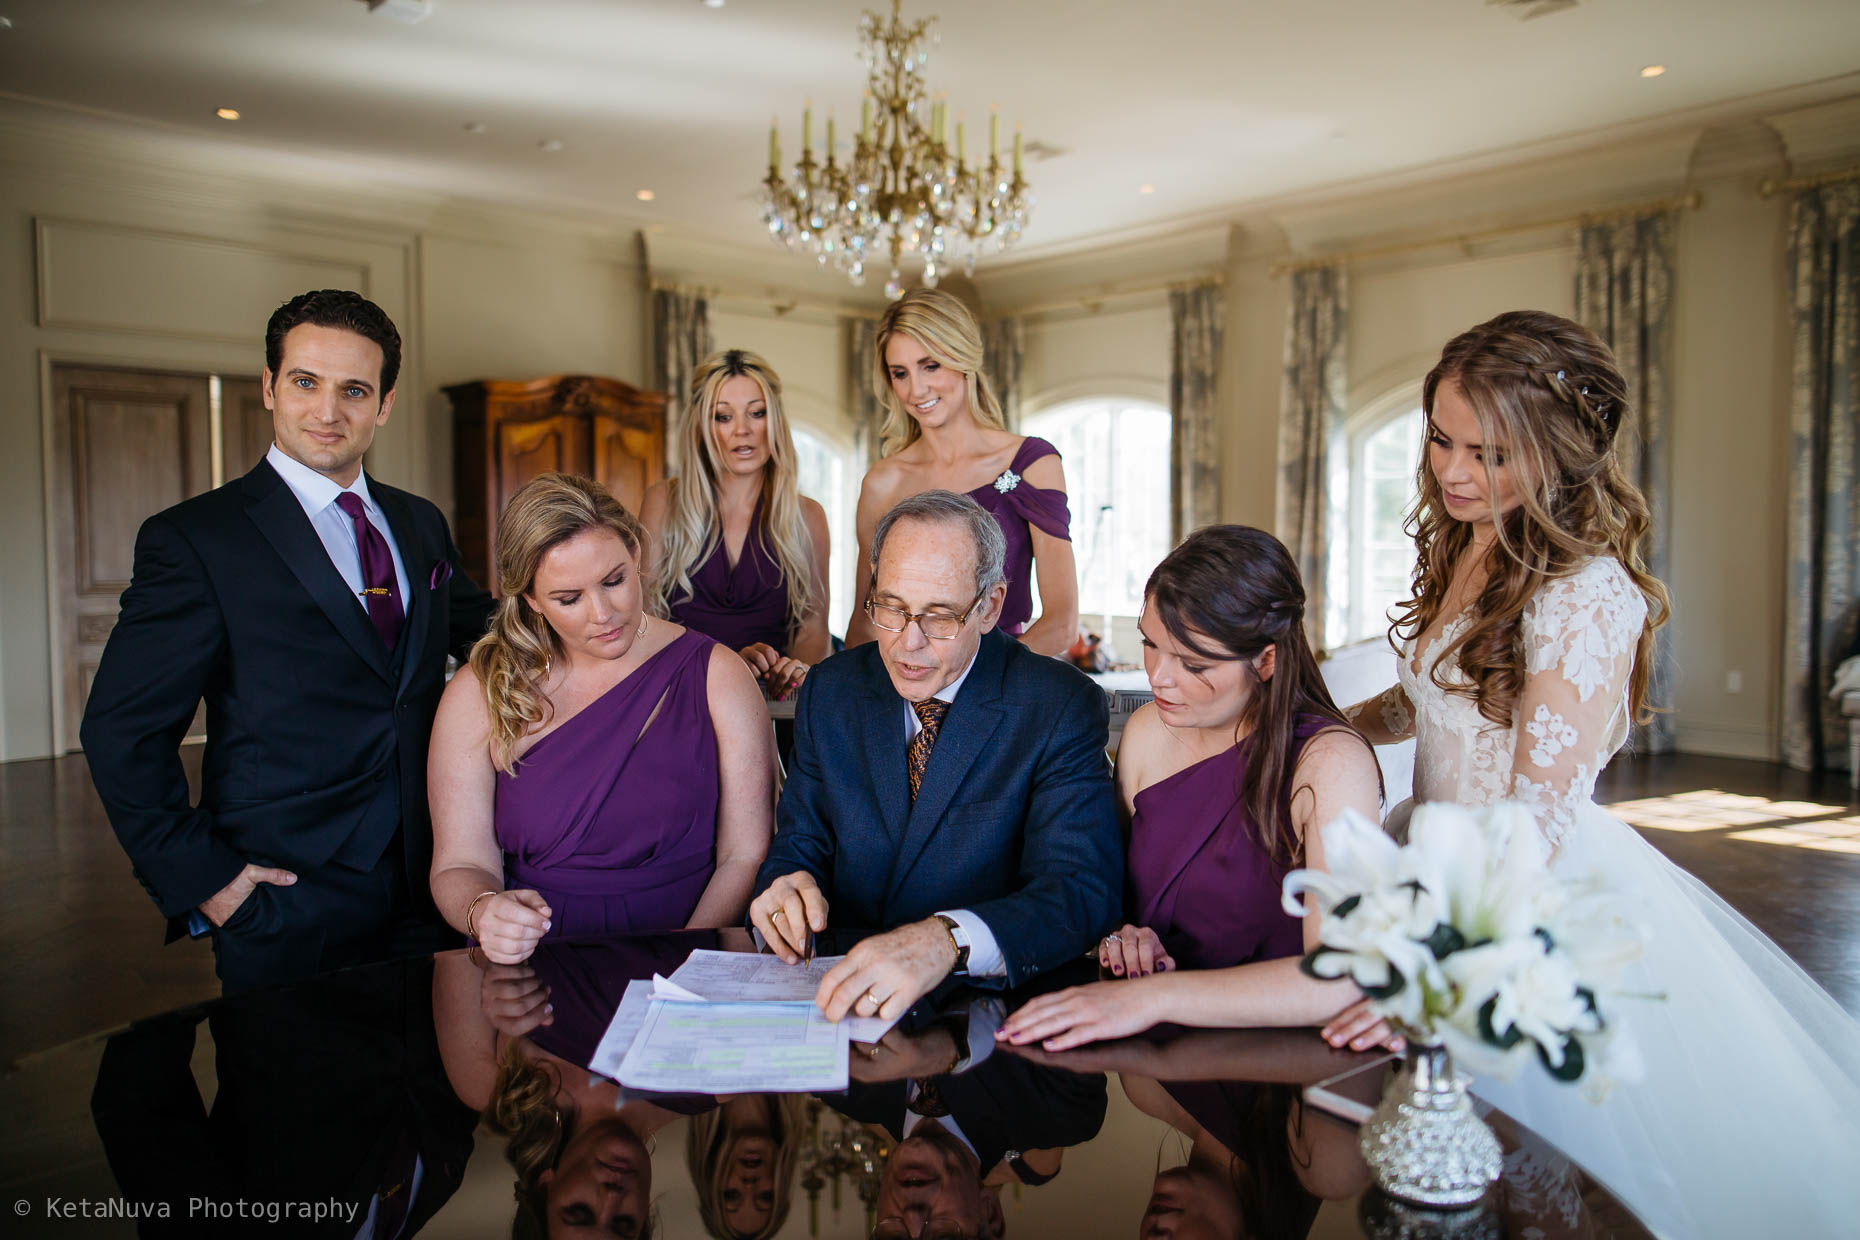 The signing of the marriage certificate. Park Chateau, NJ. 